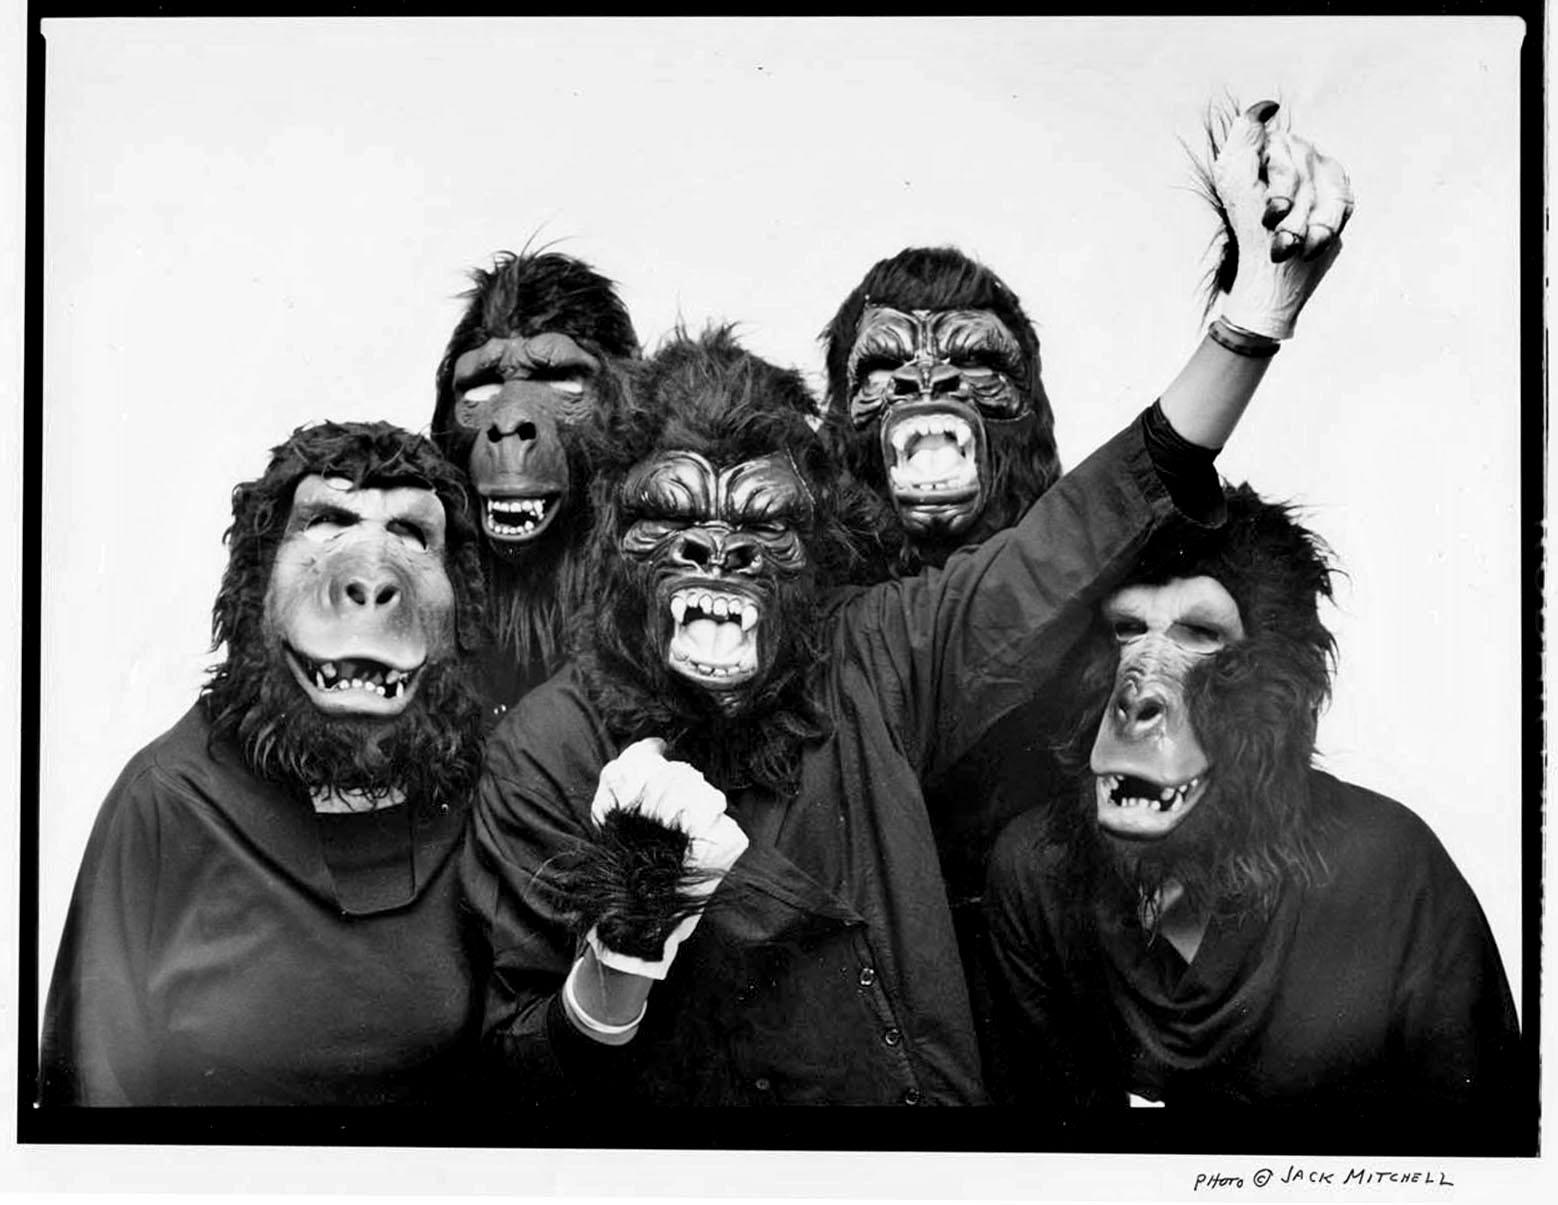 Jack Mitchell Black and White Photograph - The Guerrilla Girls, anonymous feminist, female activist artist group